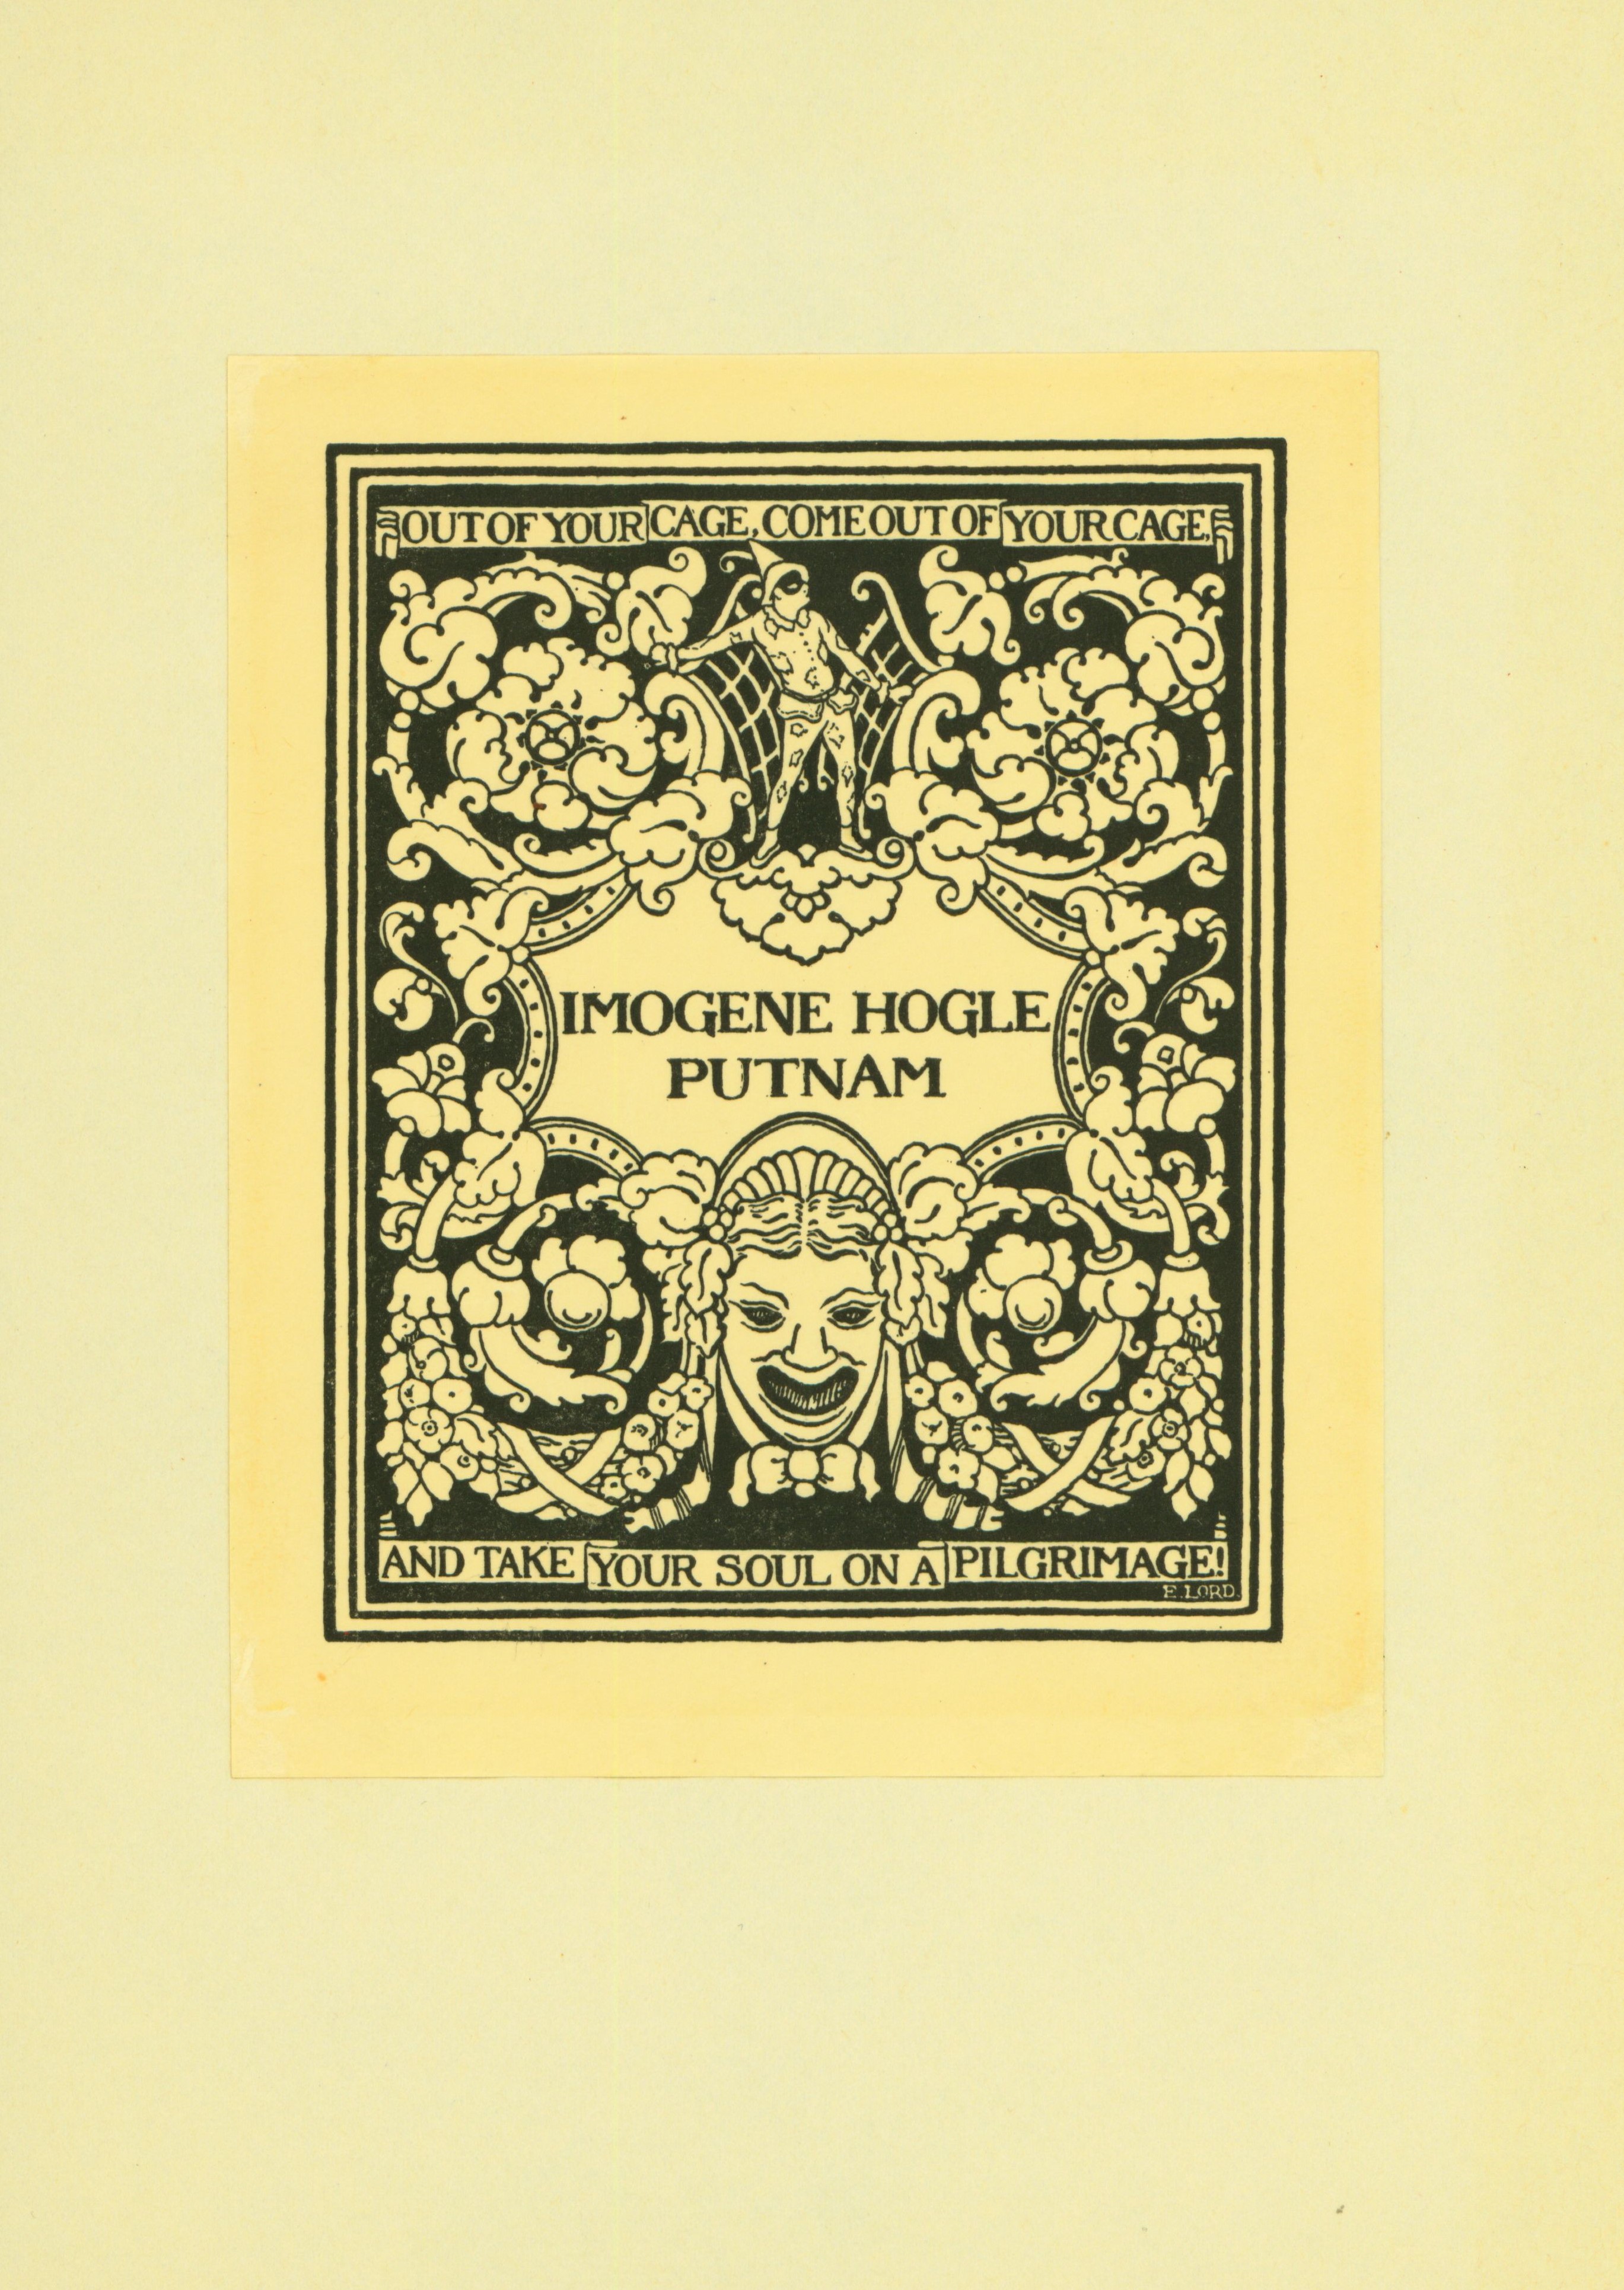 Scan of bookplate made for Imogene Hogle Putnam. Text on bookmark: "Come out of your cage, come out of your cage. And take your soul on a pilgrimage."